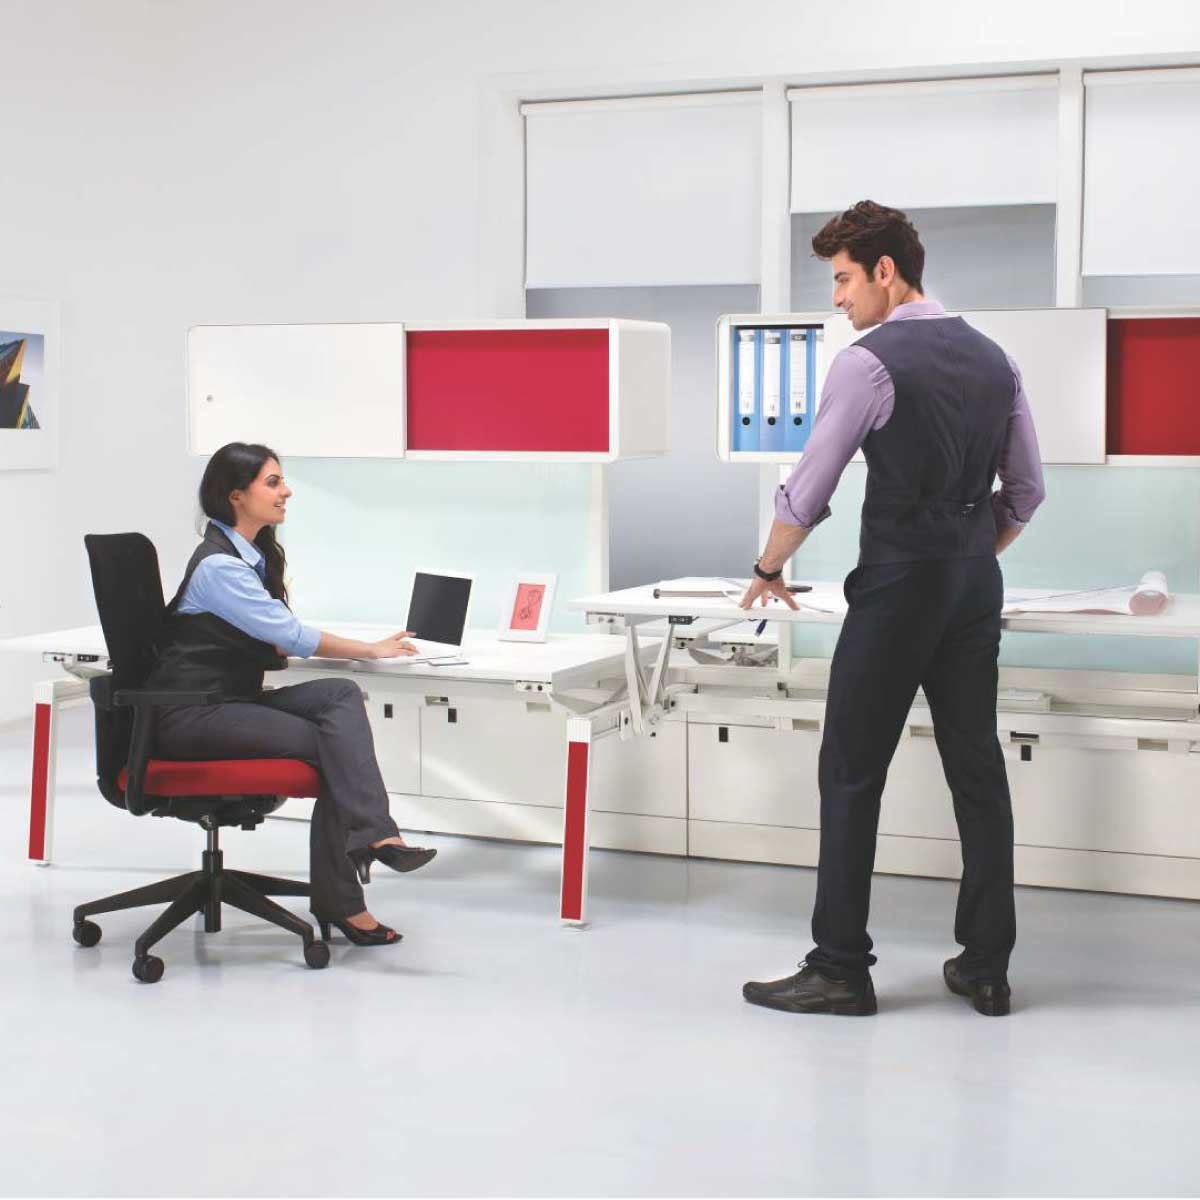 Adjustable Workstations Manufacturers, Suppliers in Dwarka Sector 28